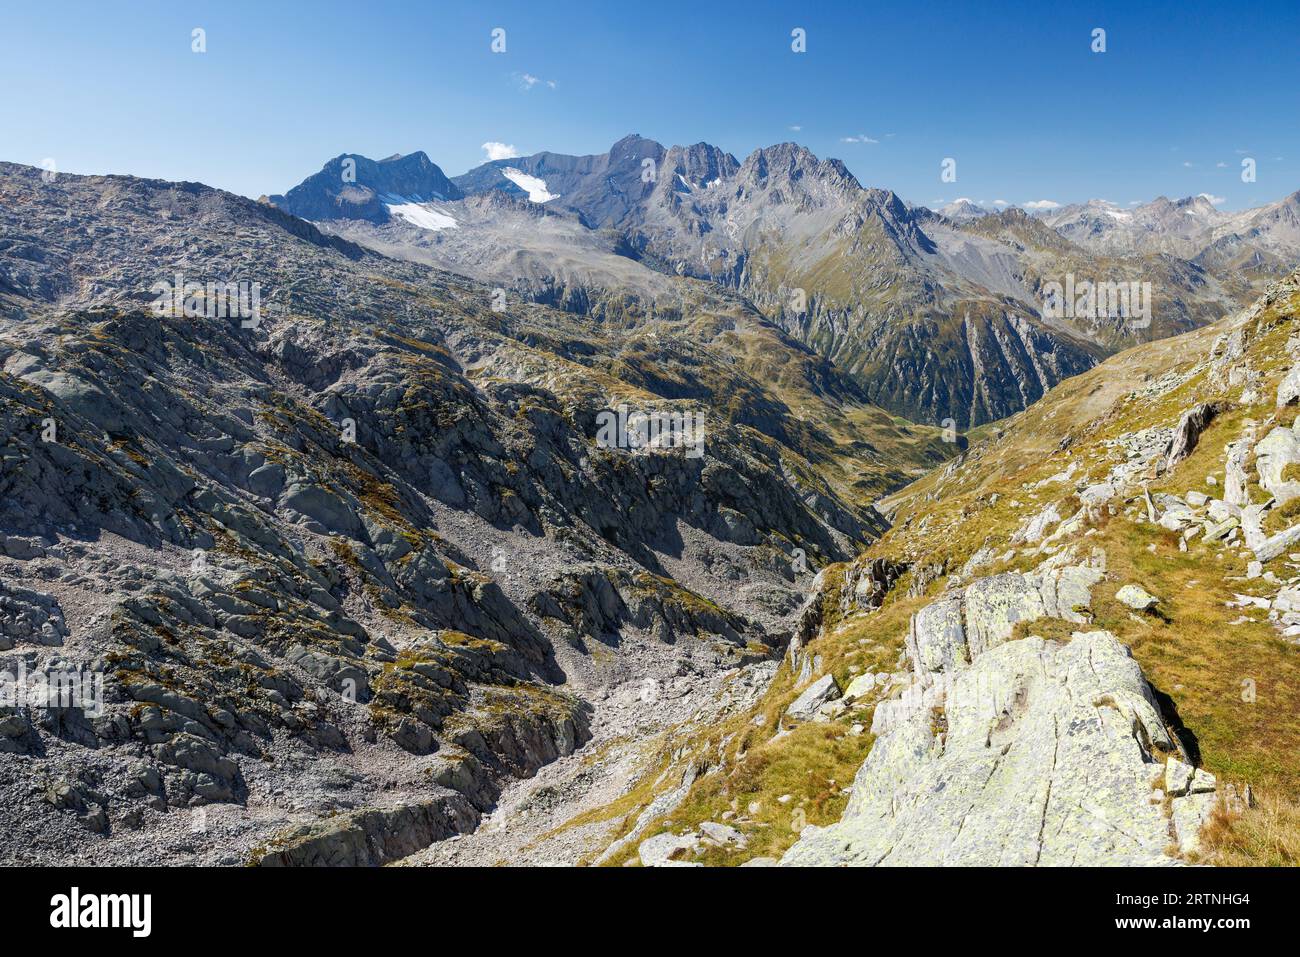 view from Cima di Garina over Val d'Uffiern, Swiss Alps Stock Photo